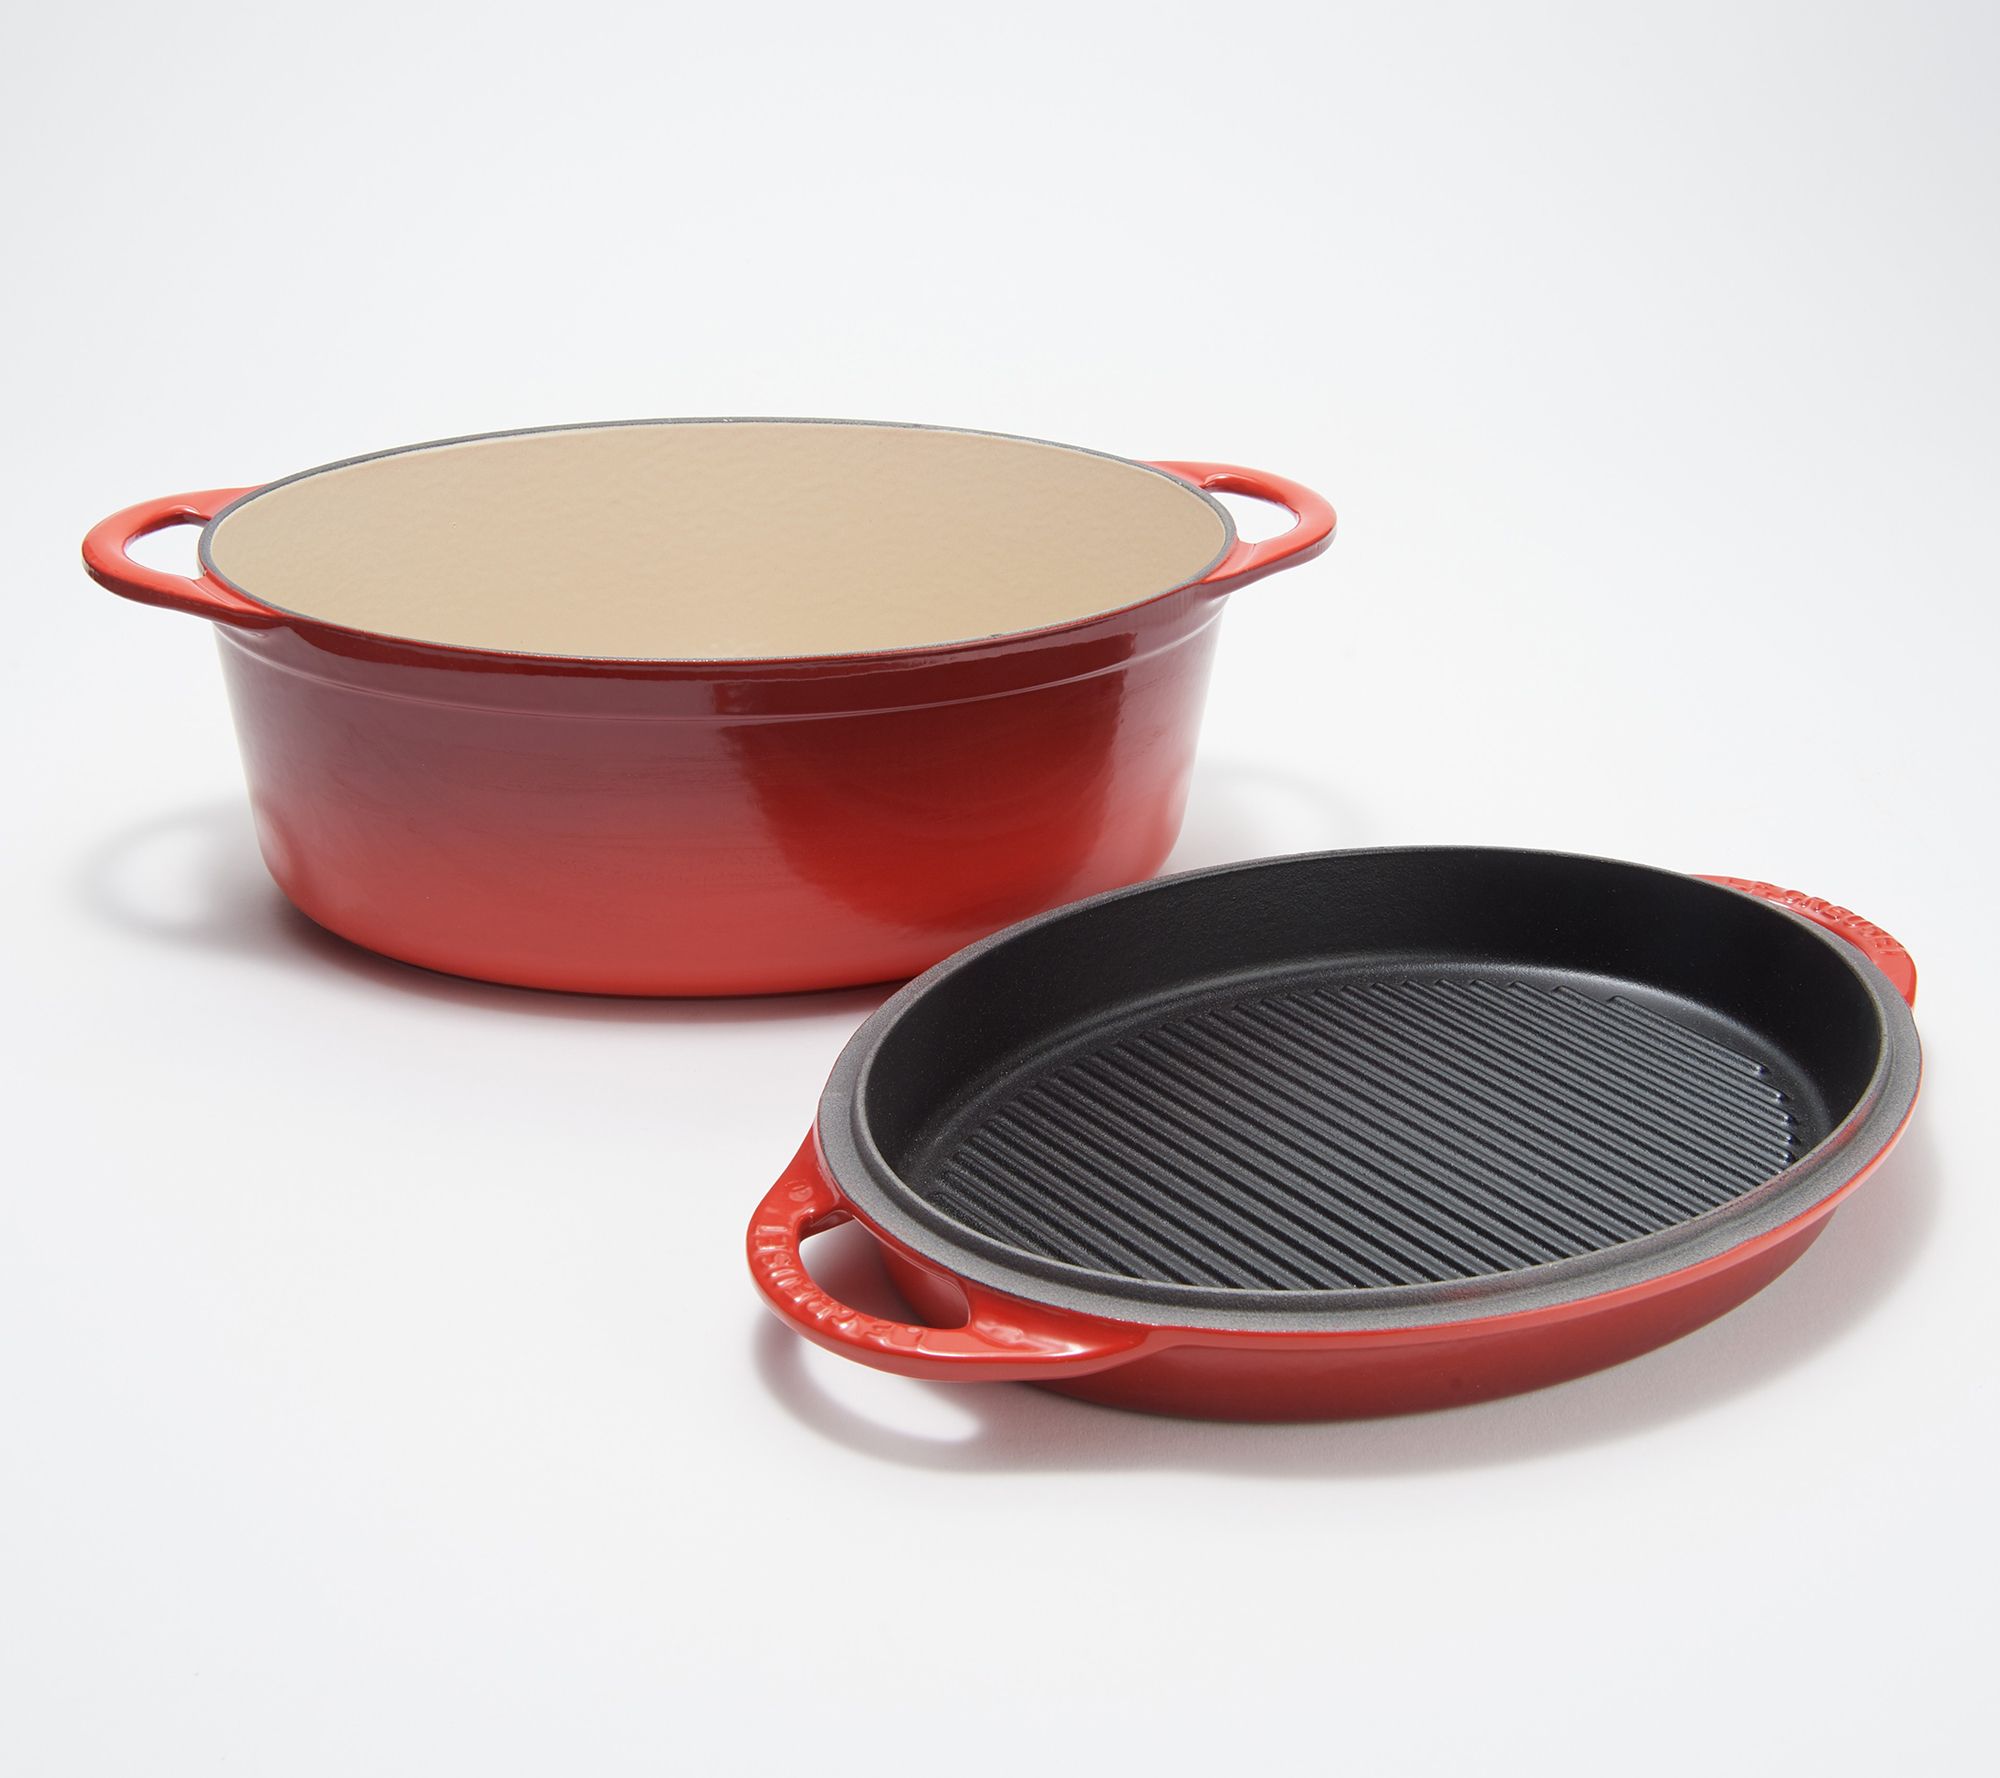 Le Creuset 10 1/4 inch Cast Iron Grill Pan 